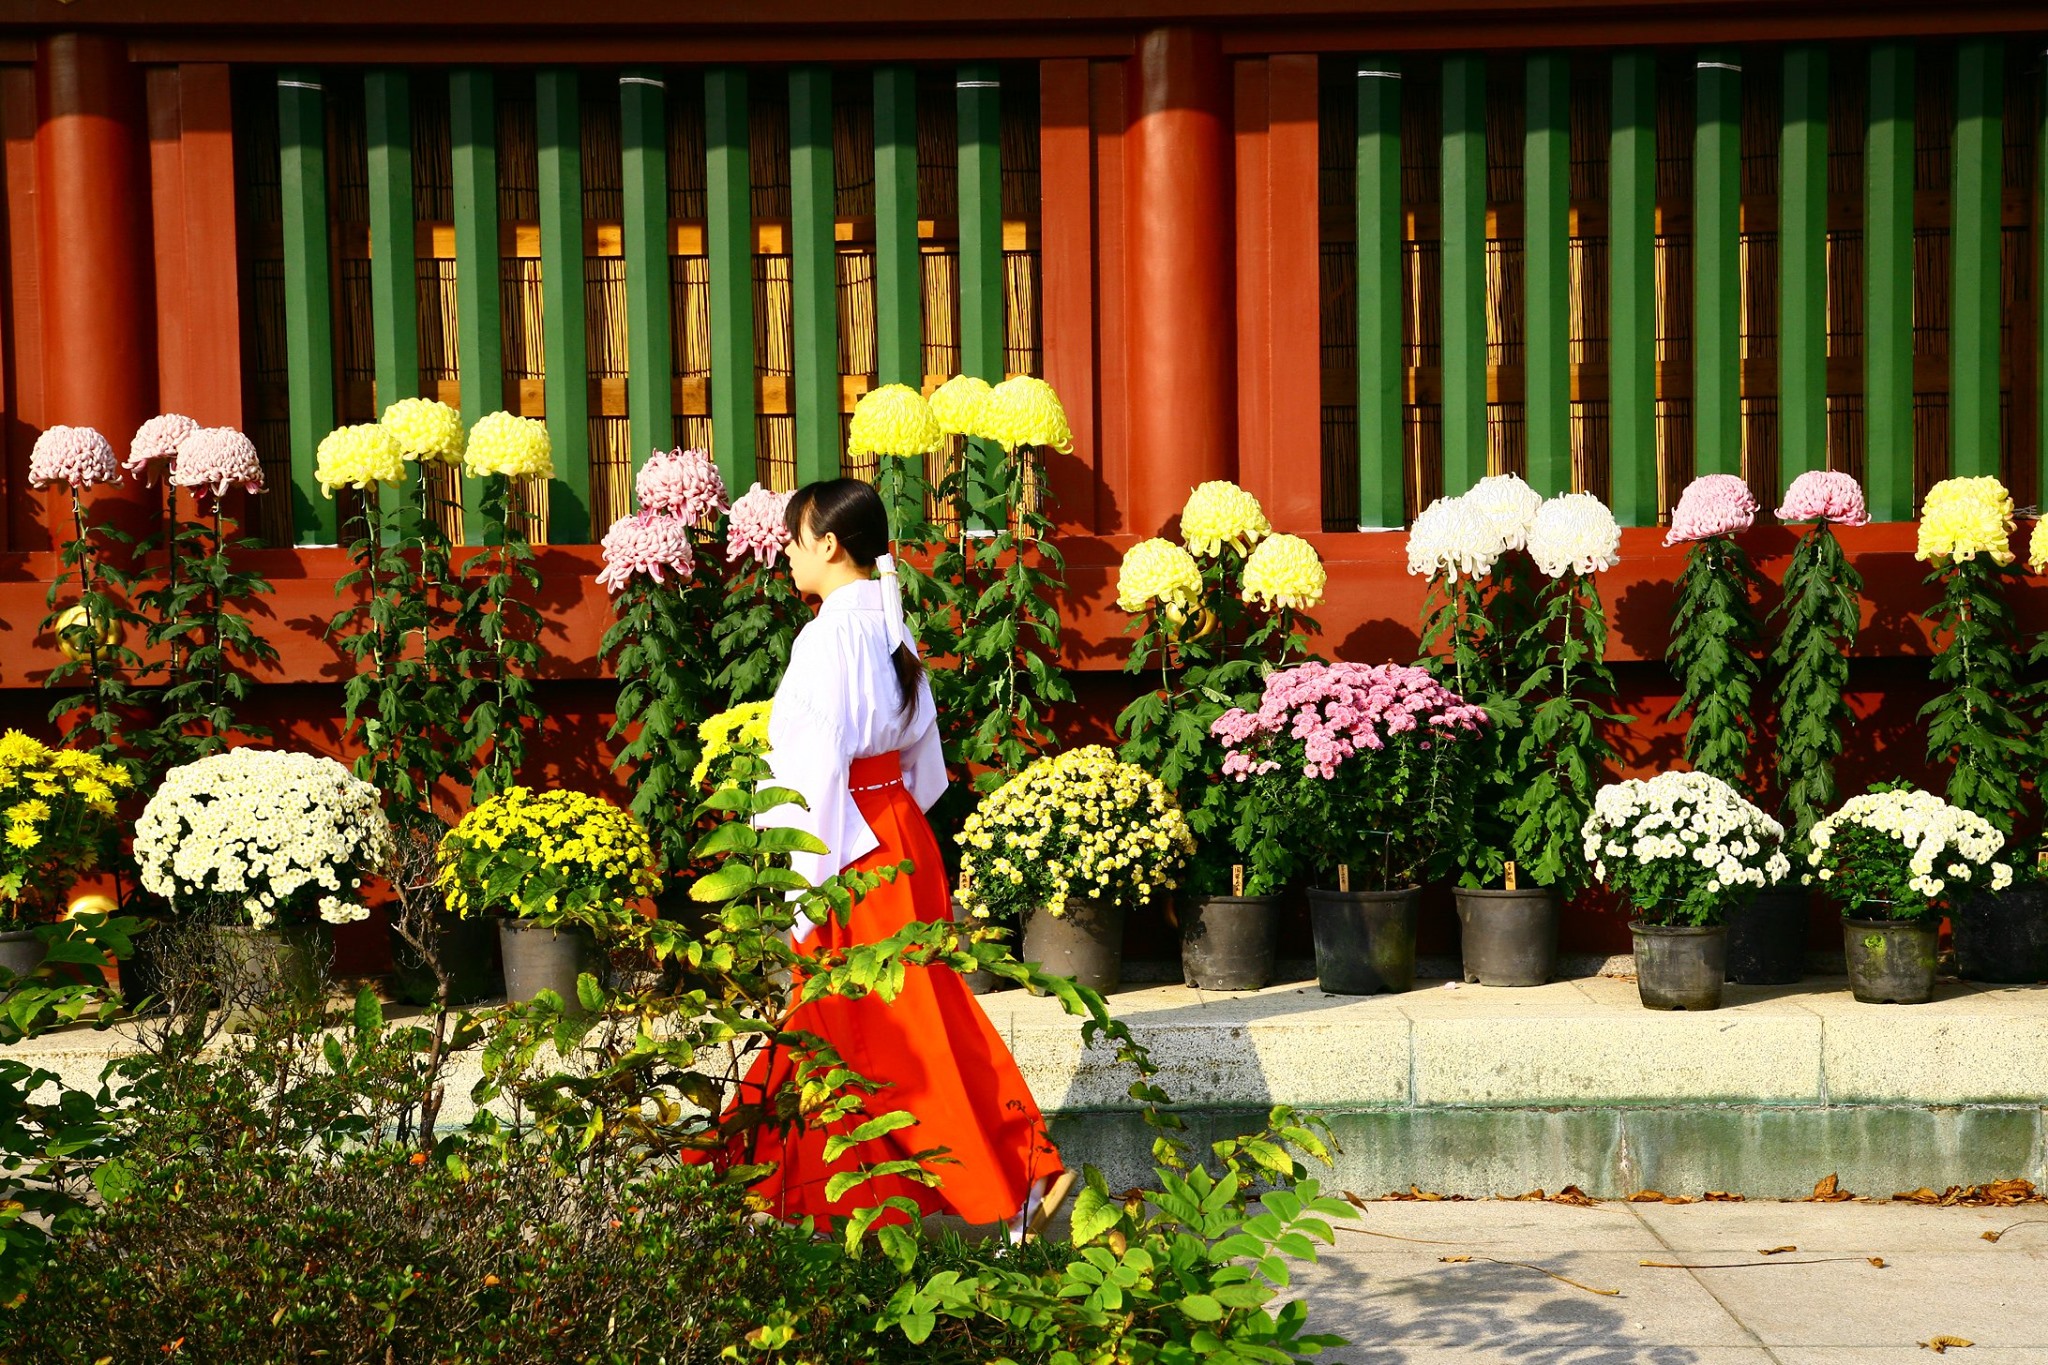 Let’s take a peek at our neighbors: a global look at the Chrysanthemum – Japan